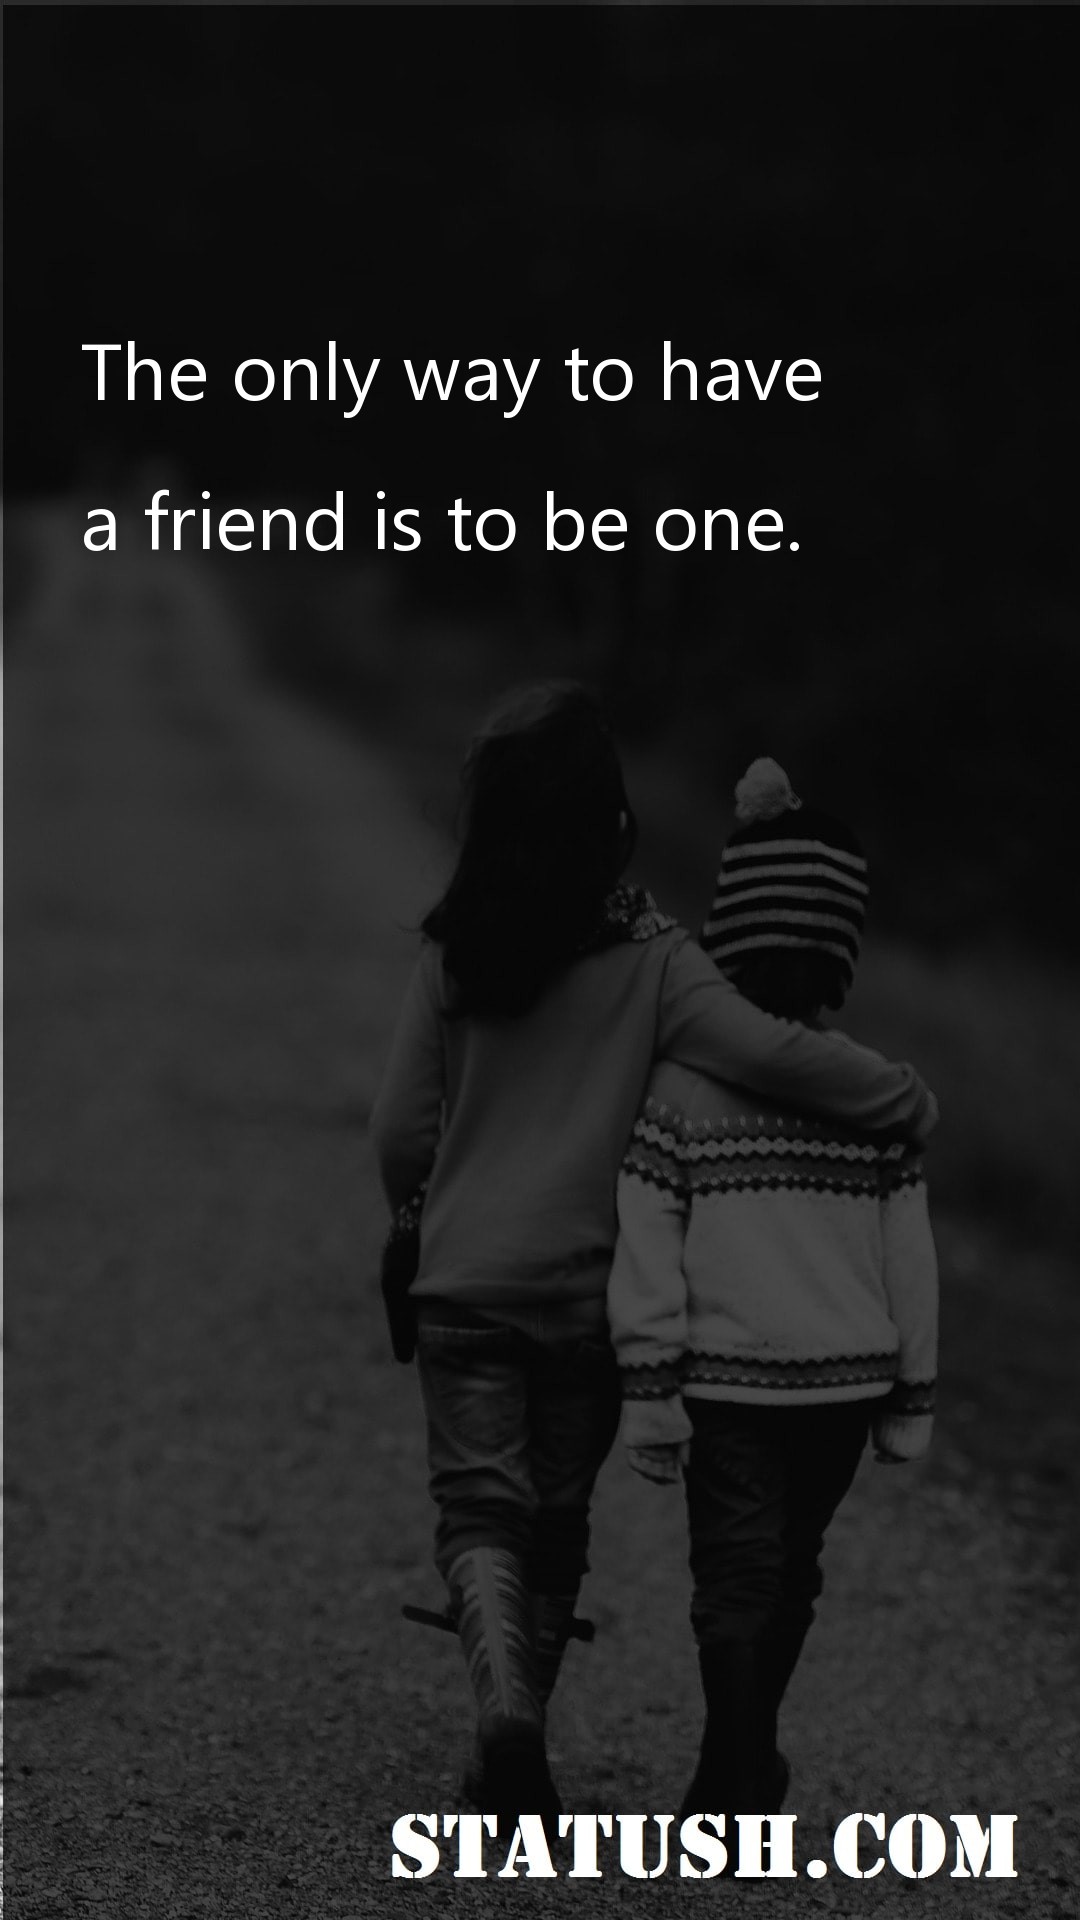 The only way to have - Friendship Quotes at statush.com